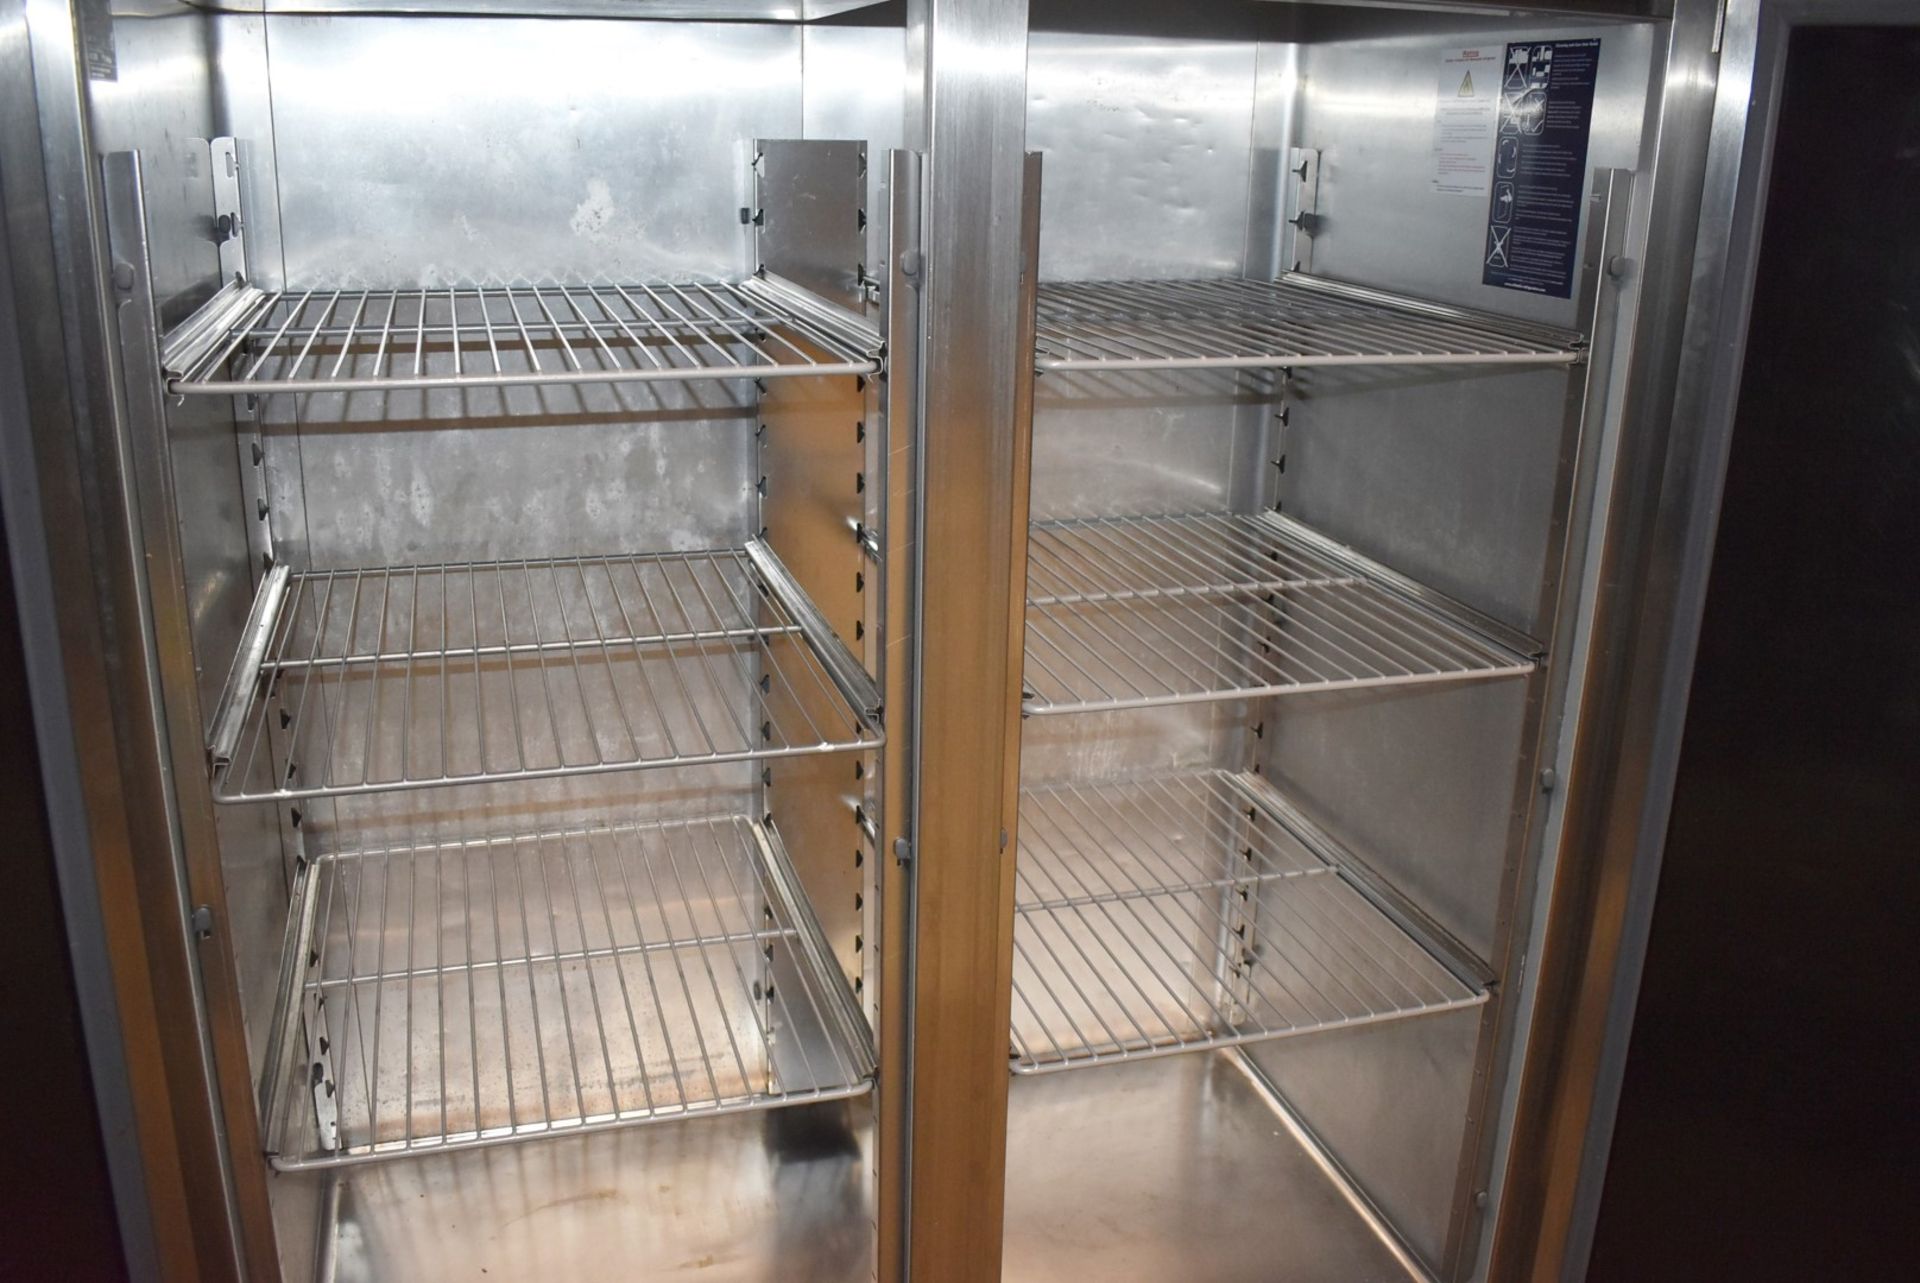 1 x Williams Upright Double Door Refrigerator With Stainless Steel Exterior - Model HS2SA - Recently - Image 16 of 20